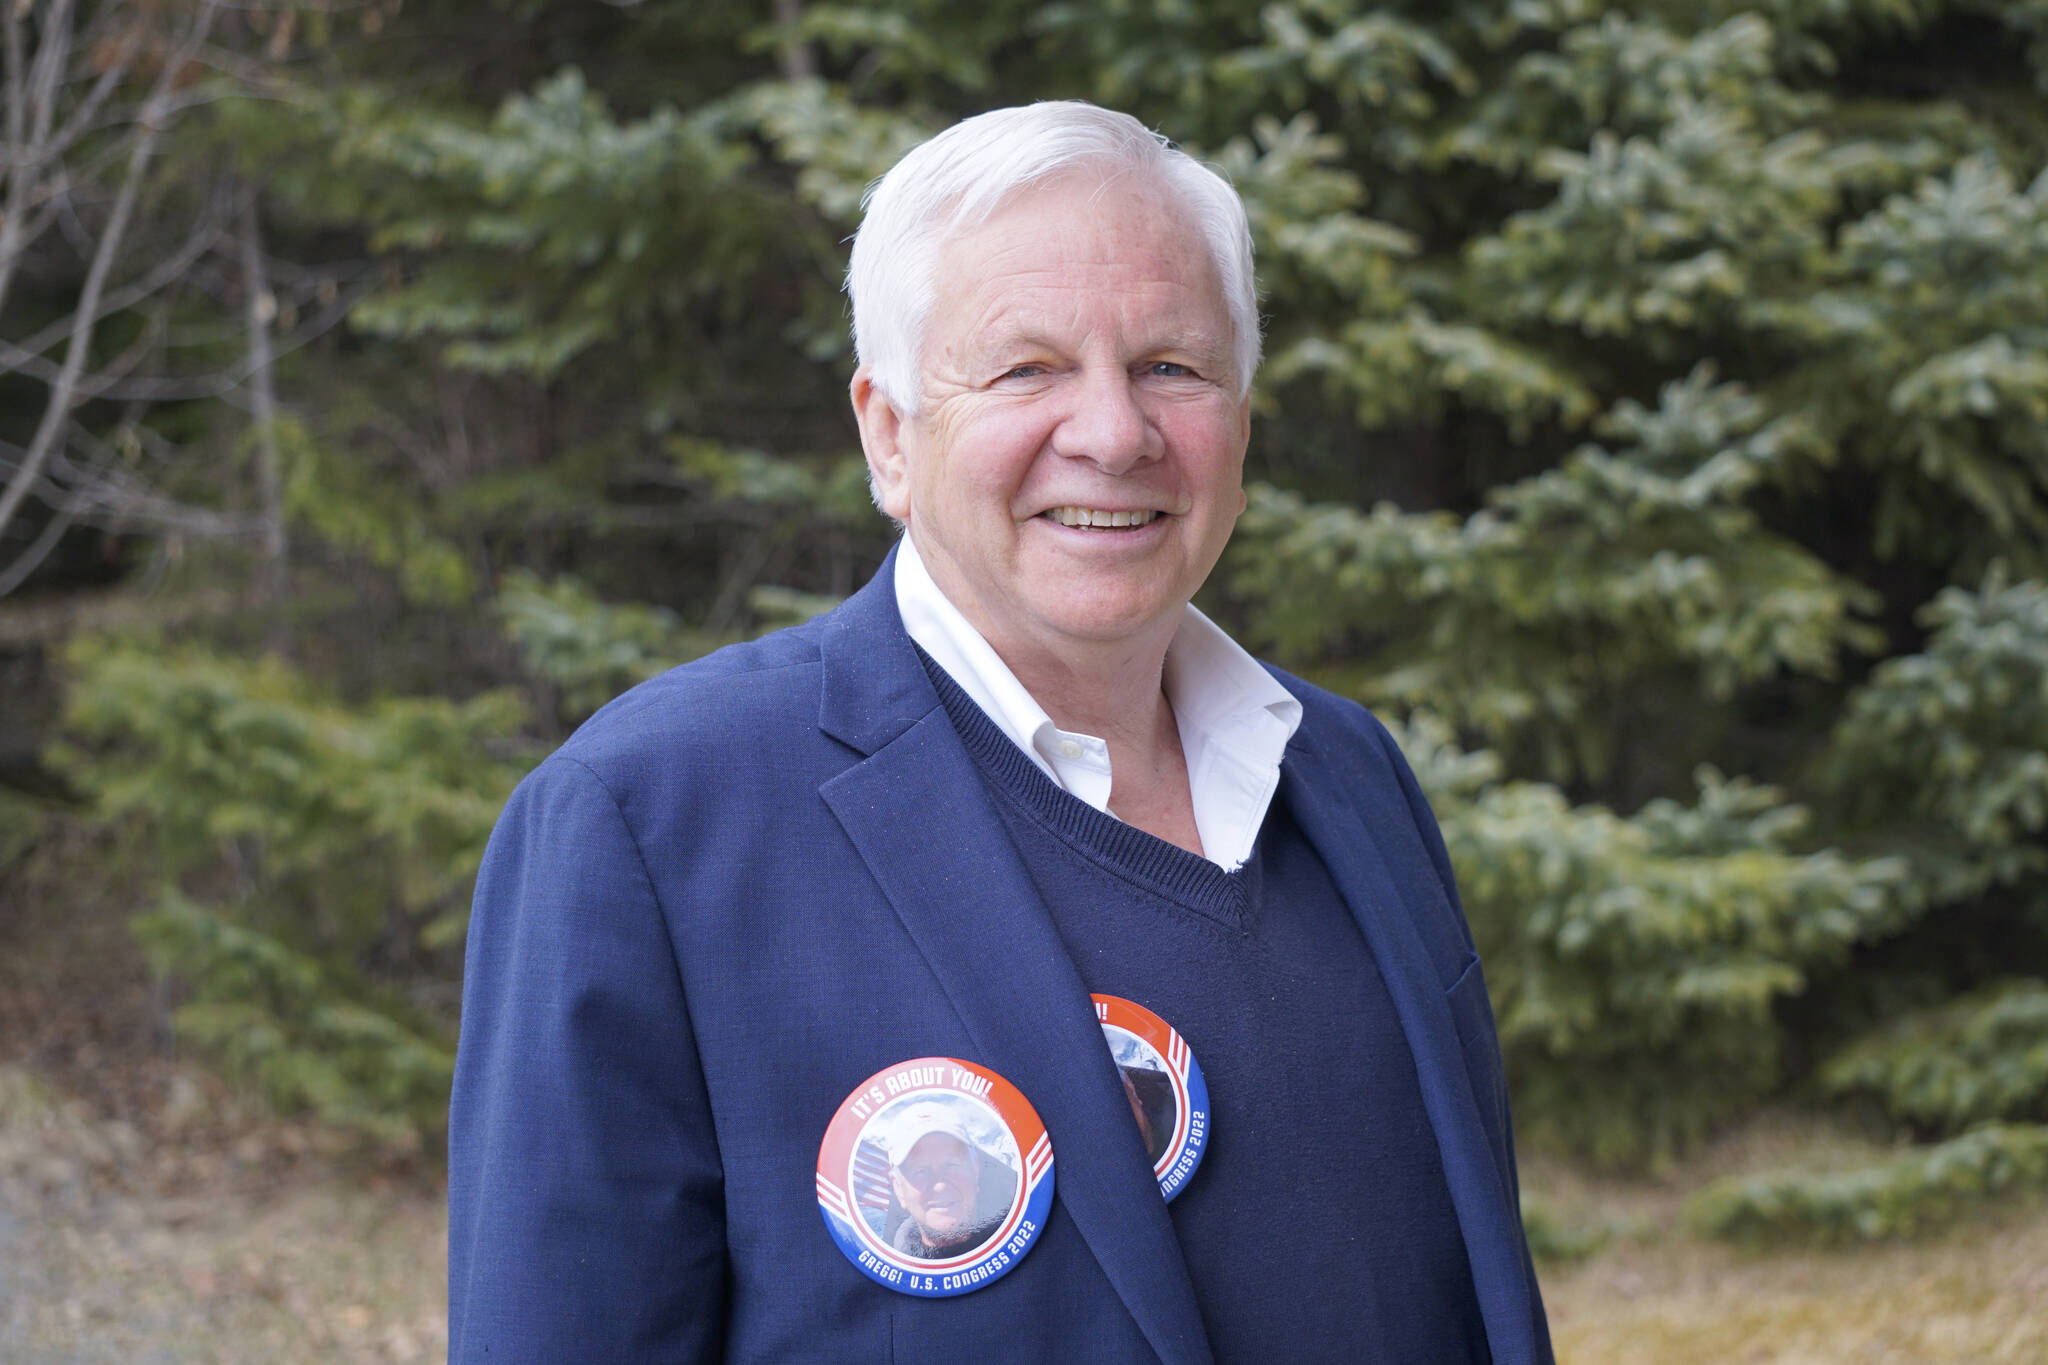 Gregg Brelsford, an independent candidate for Alaska’s U.S. House of Representatives seat, poses for a photo on Friday, April 15, 2022, in Homer, Alaska. (Photo by Michael Armstrong/Homer New)